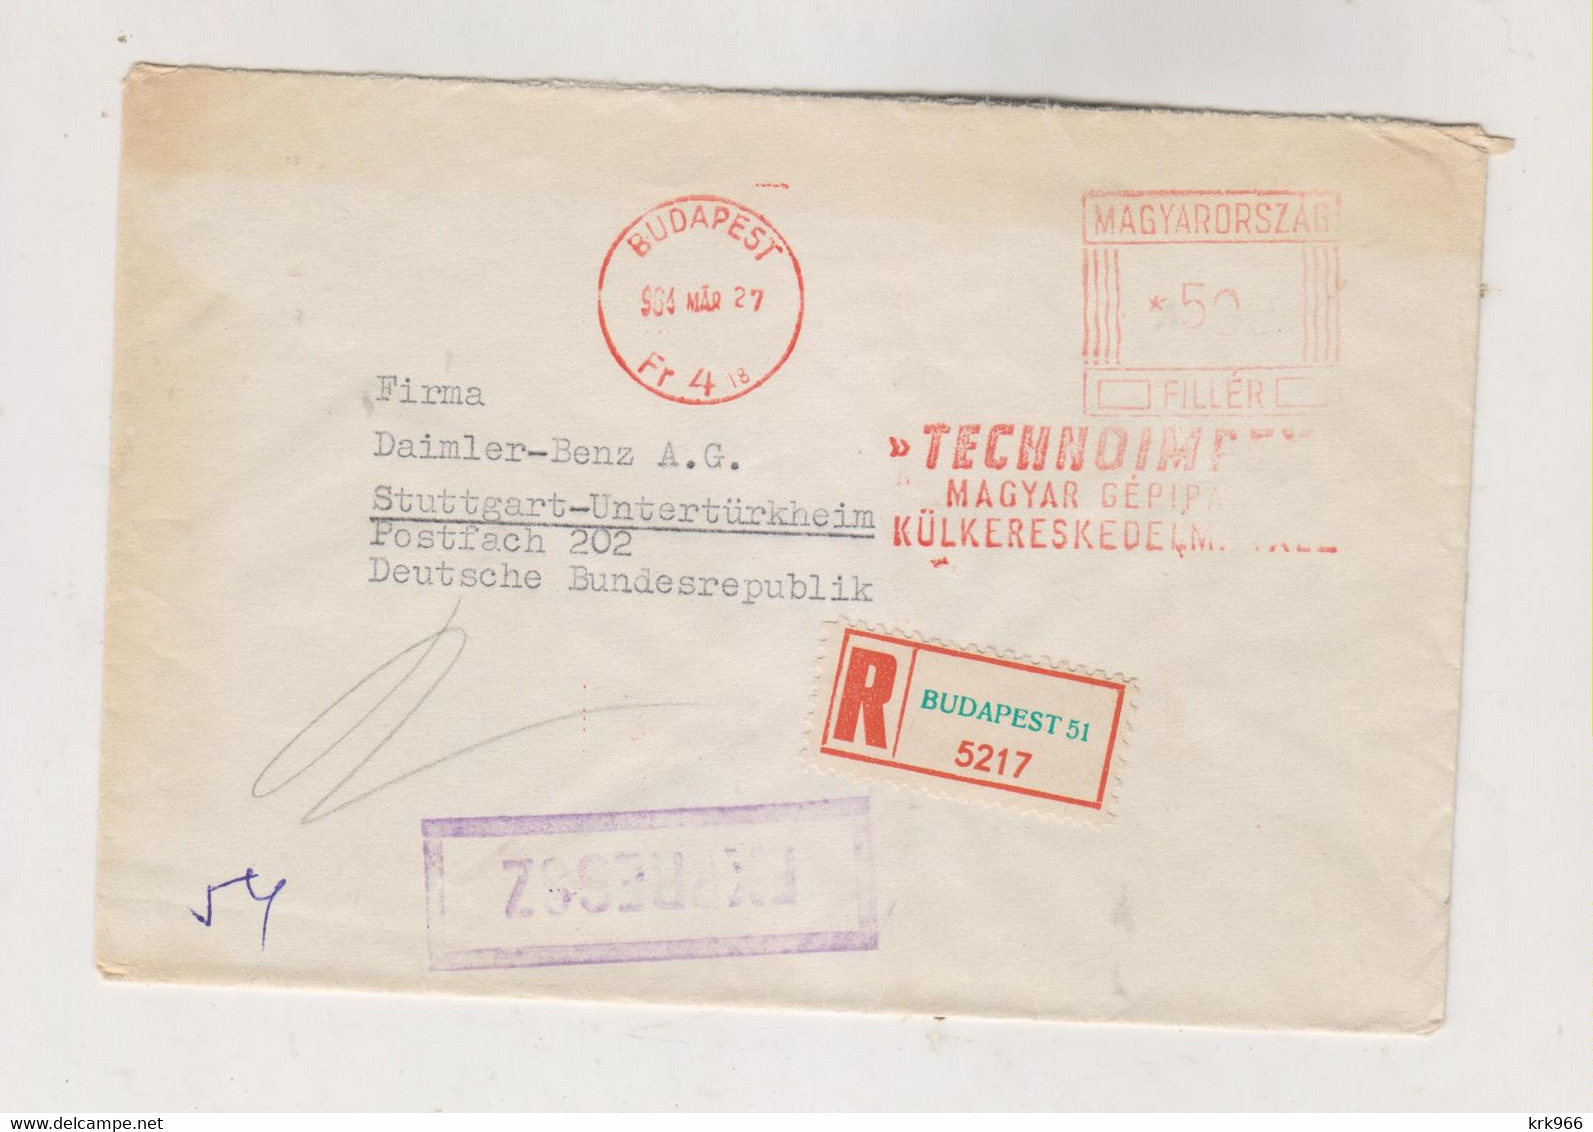 HUNGARY BUDAPEST 1964  Nice Registered   Priority  Cover To Germany Meter Stamp - Briefe U. Dokumente